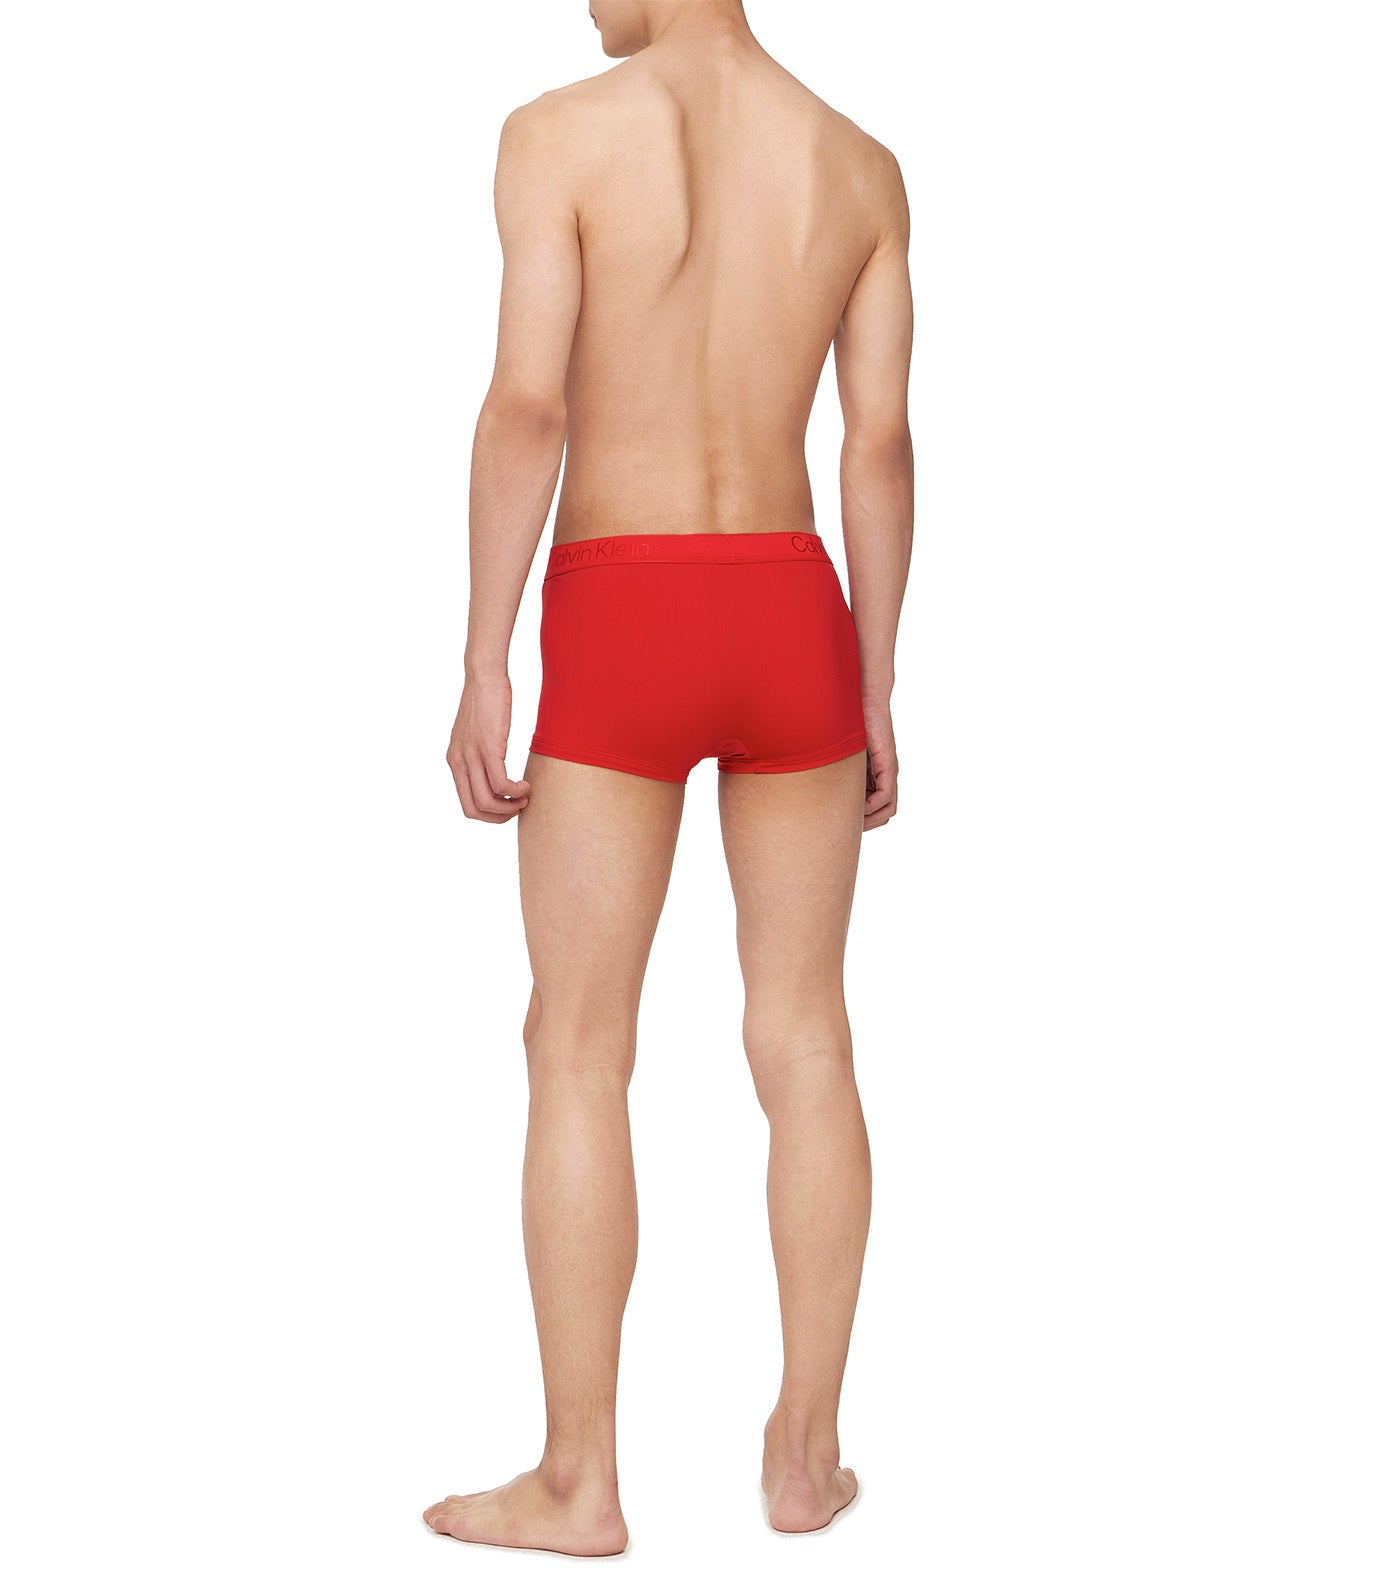 CK Black Low Rise Trunks Pompeian Red